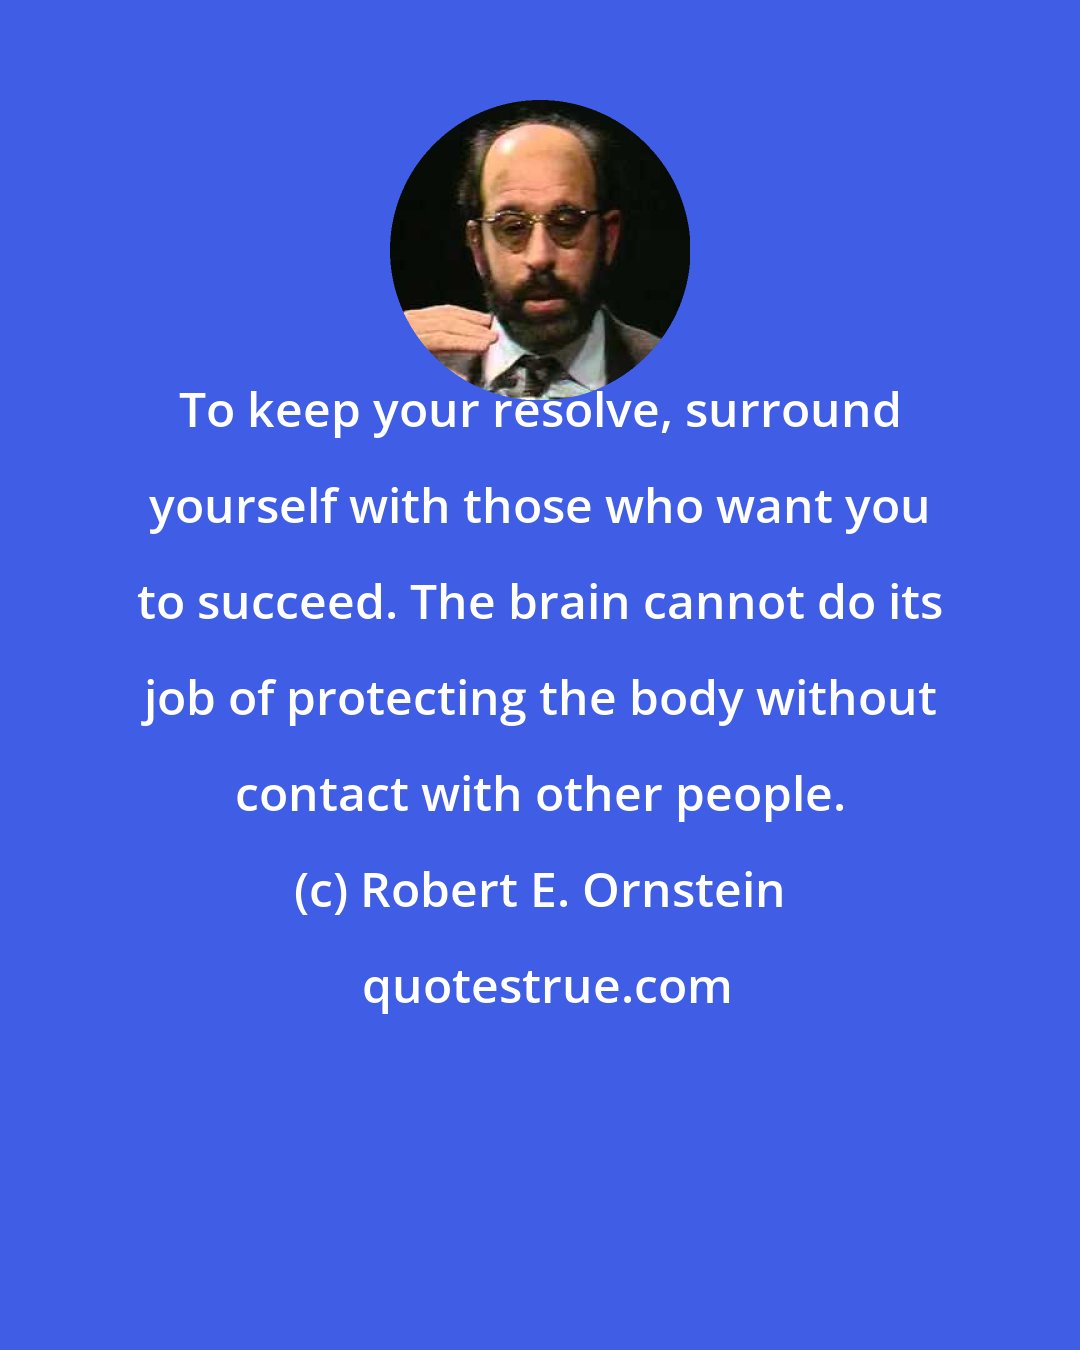 Robert E. Ornstein: To keep your resolve, surround yourself with those who want you to succeed. The brain cannot do its job of protecting the body without contact with other people.